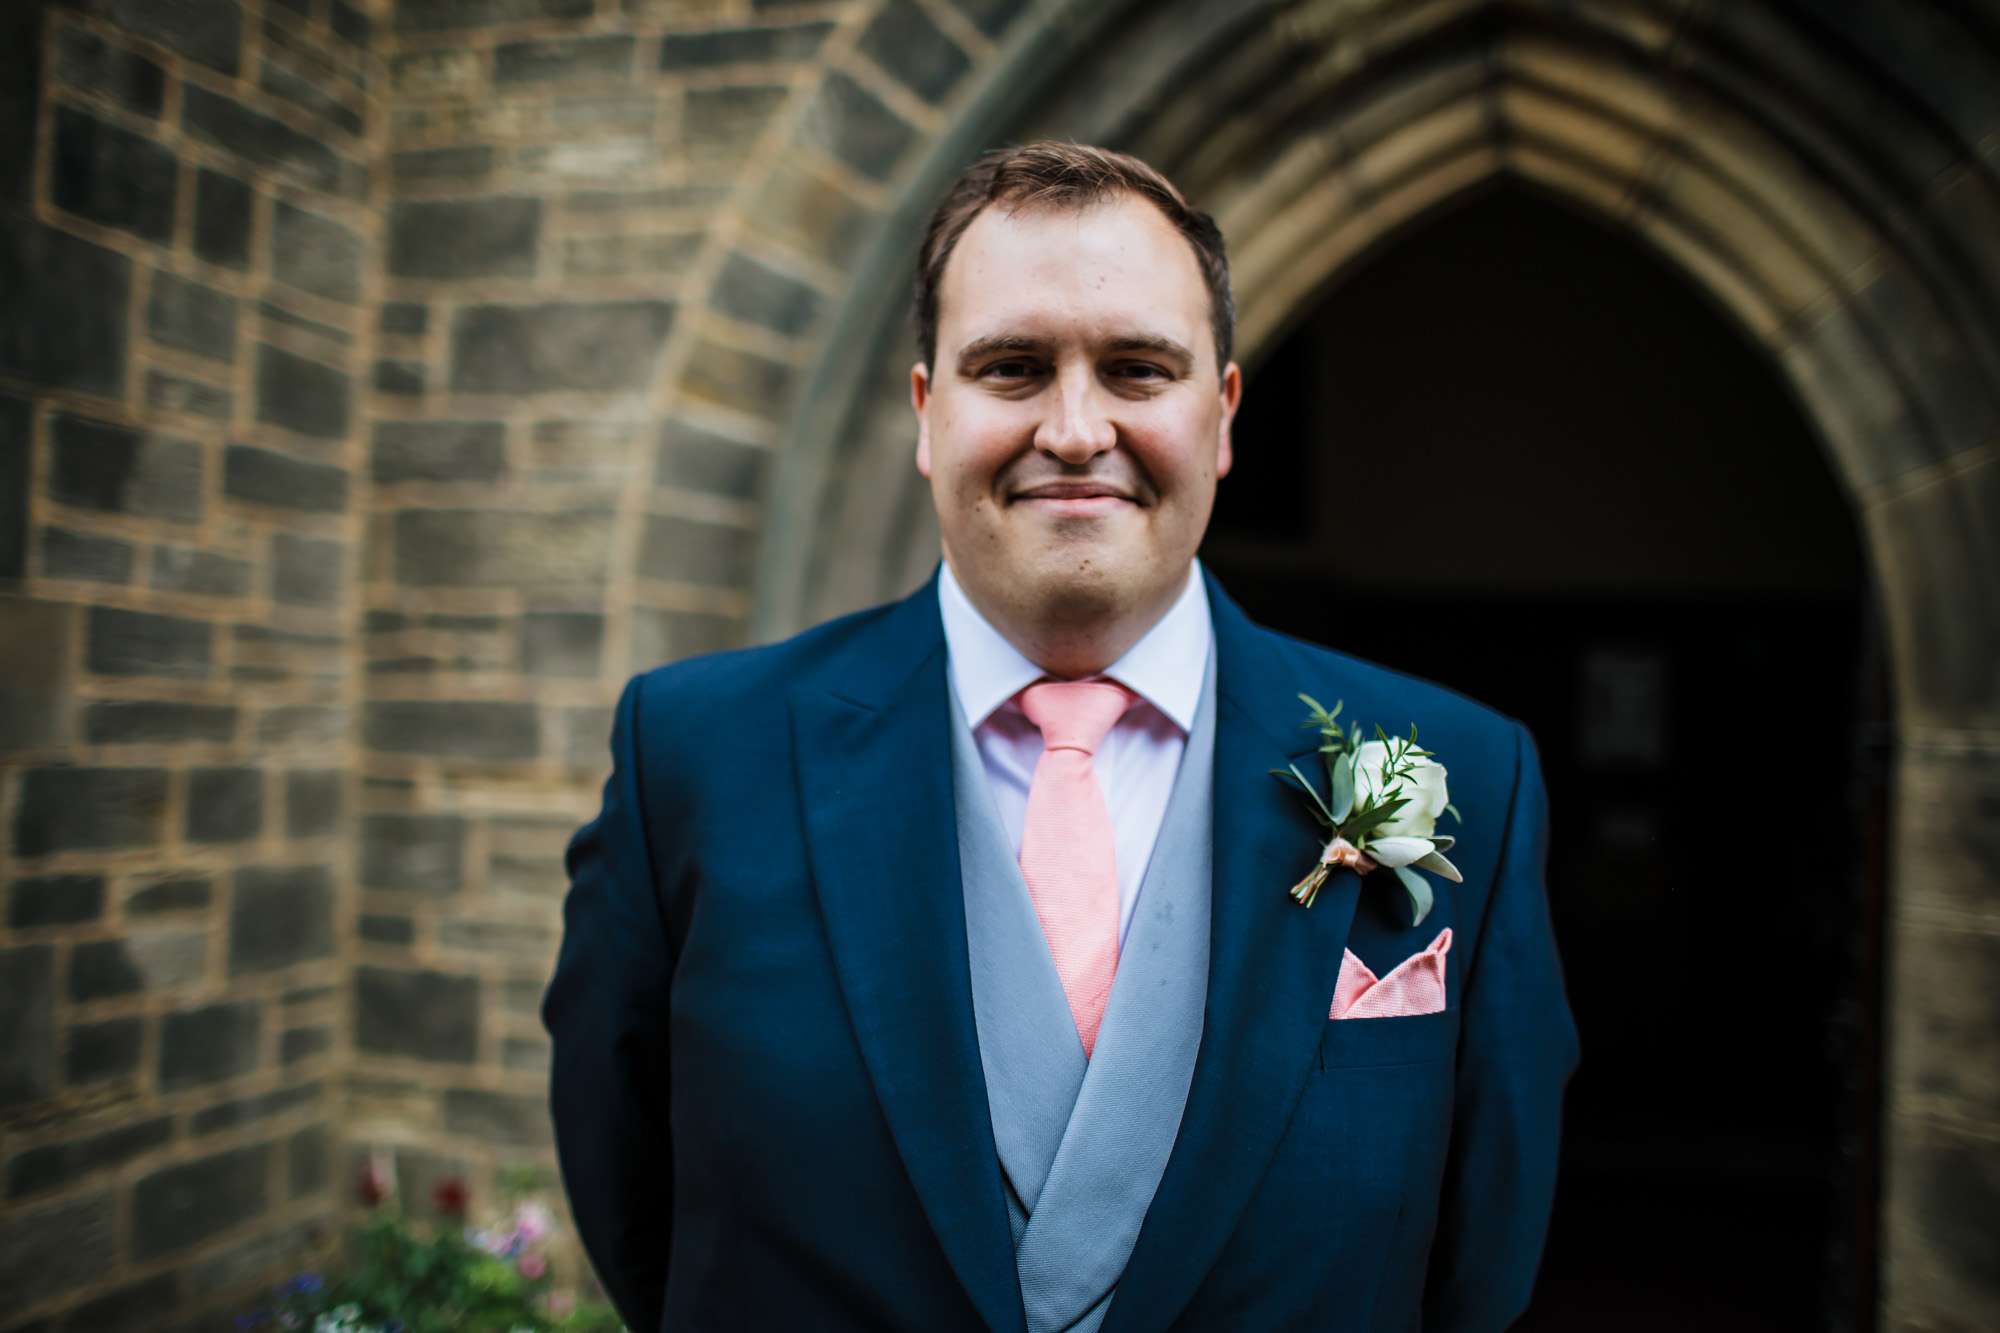 Portrait of a groom on his wedding day